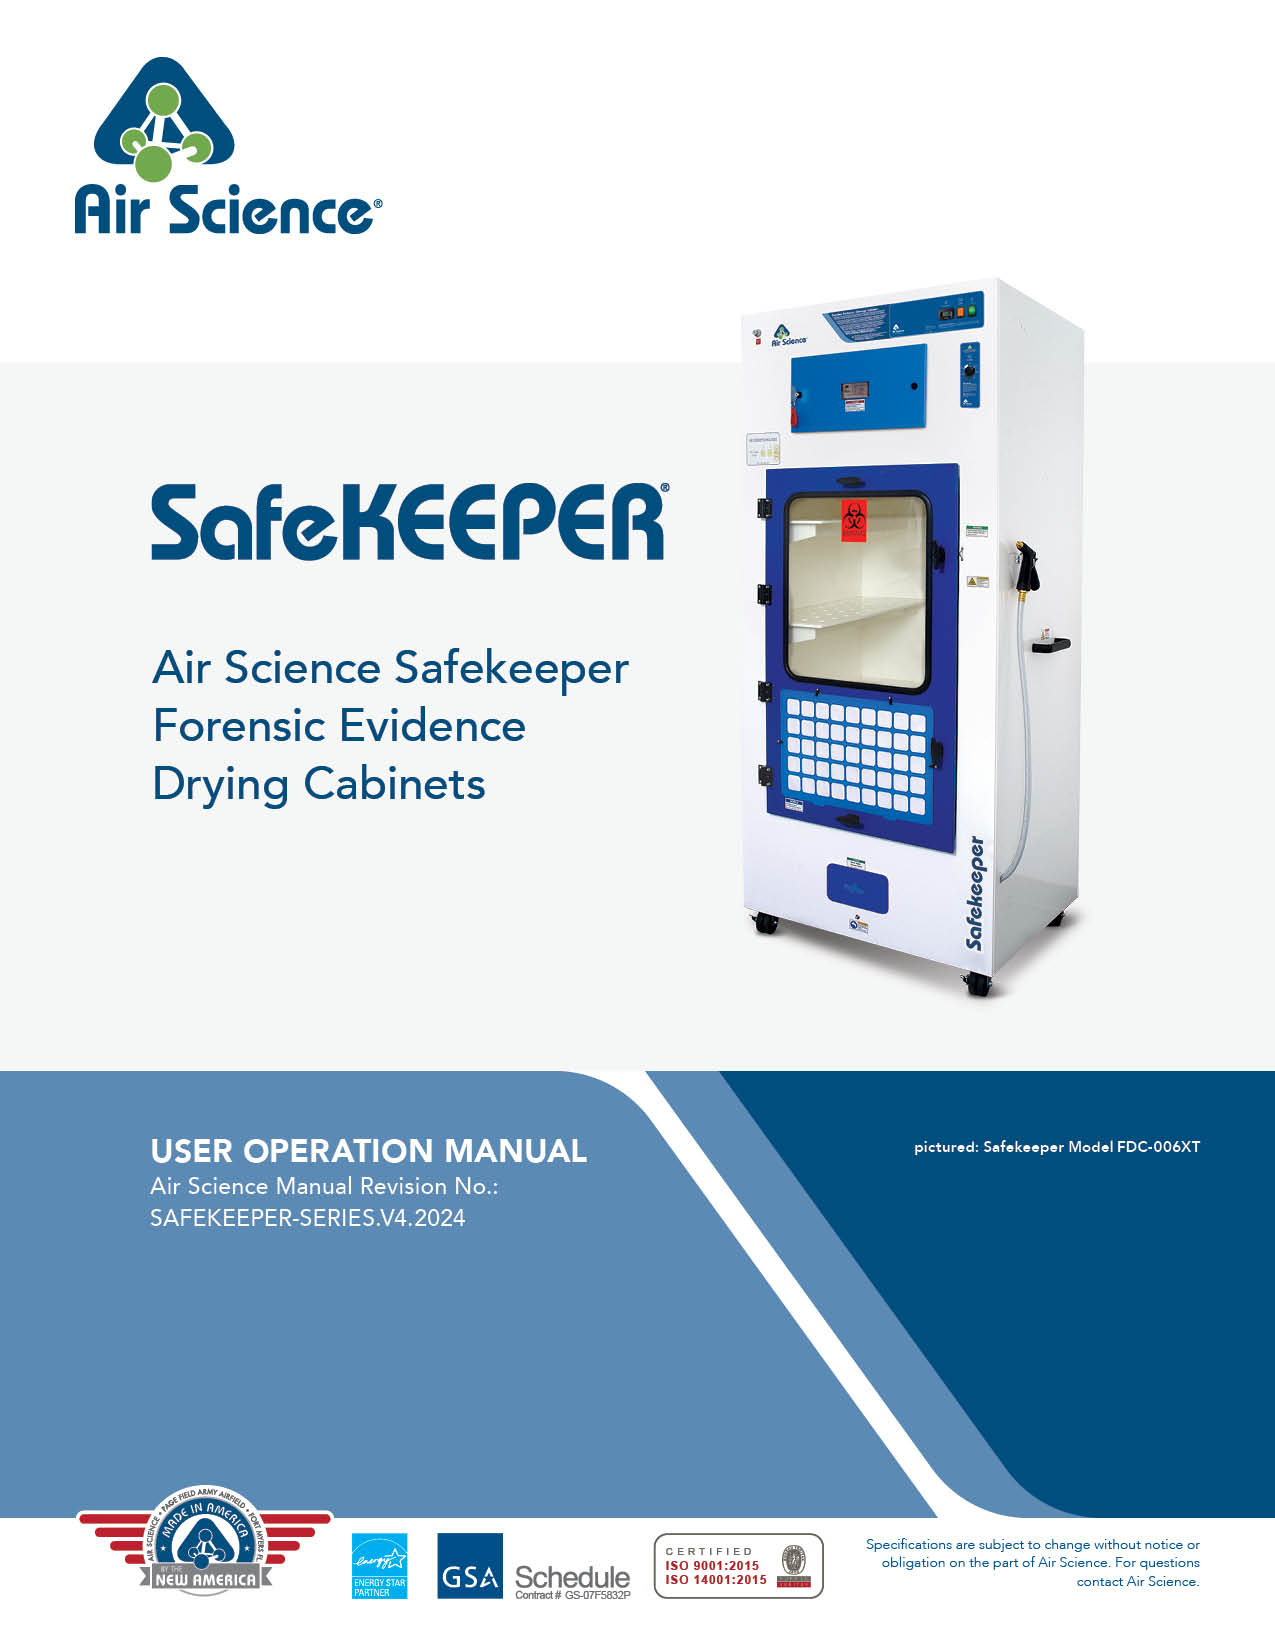 SafeKEEPER Forensic Evdience Drying Cabinets